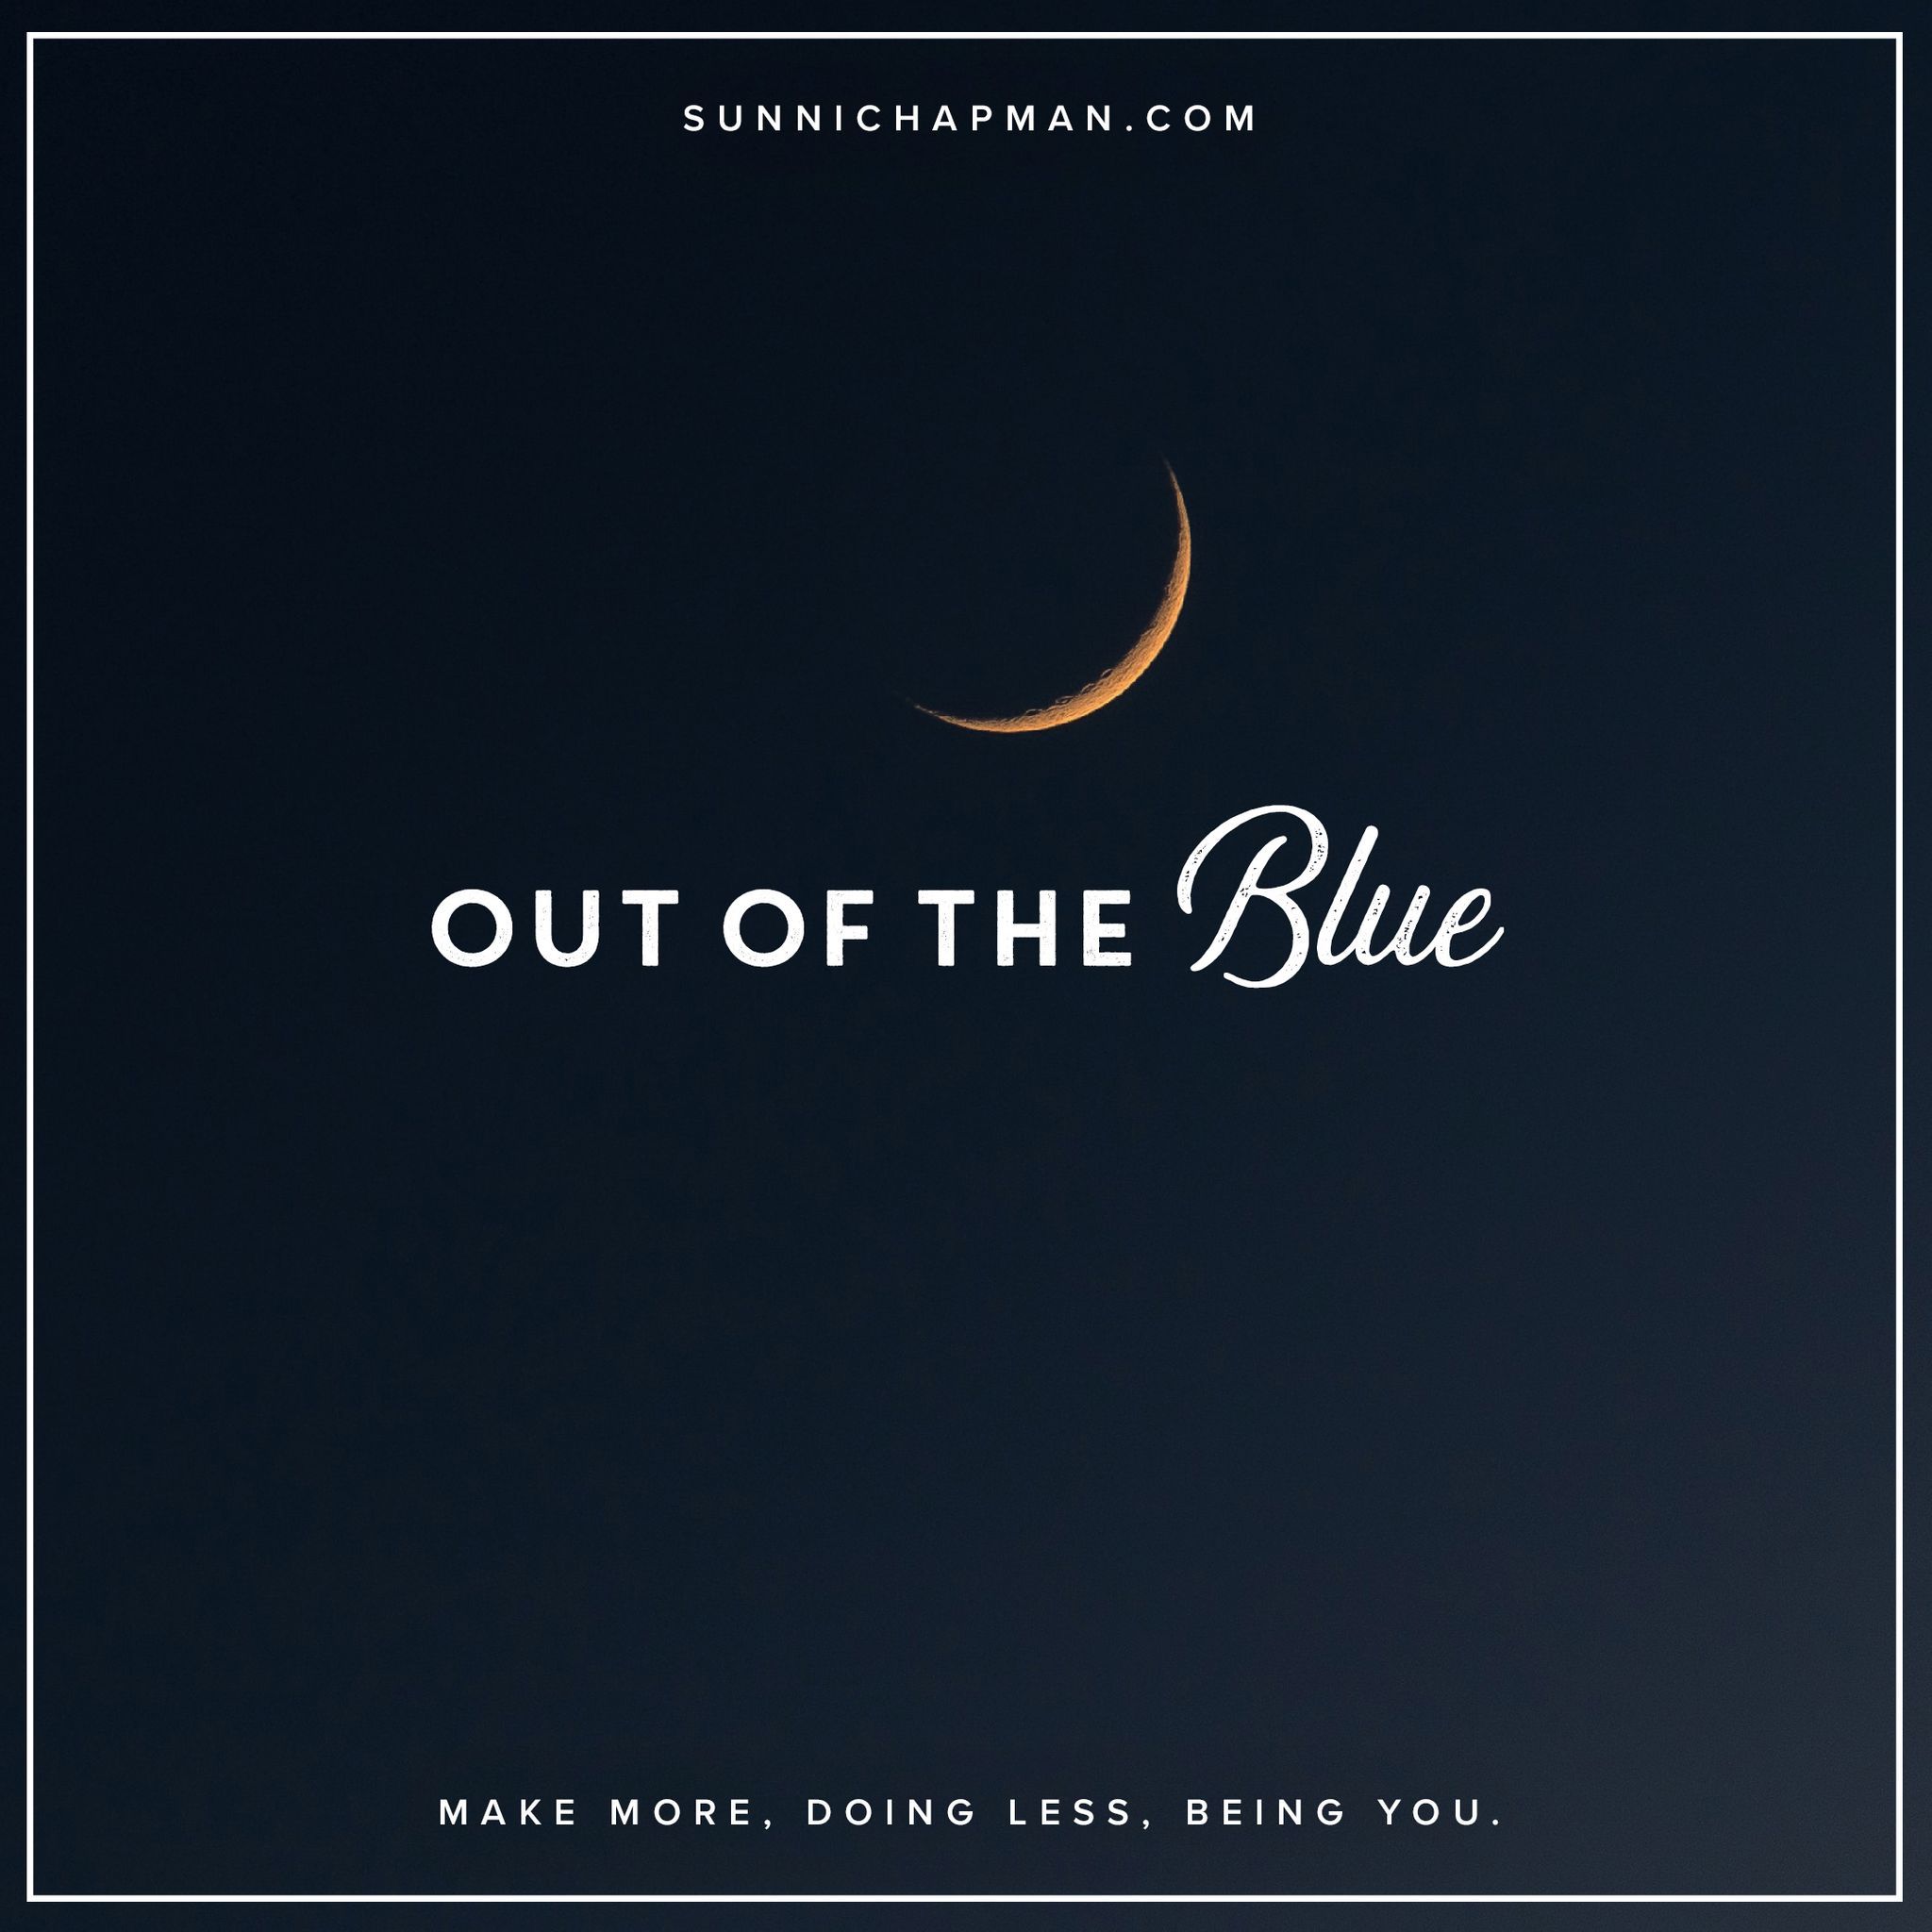 Dark night and moon, and the text: Out Of The Blue